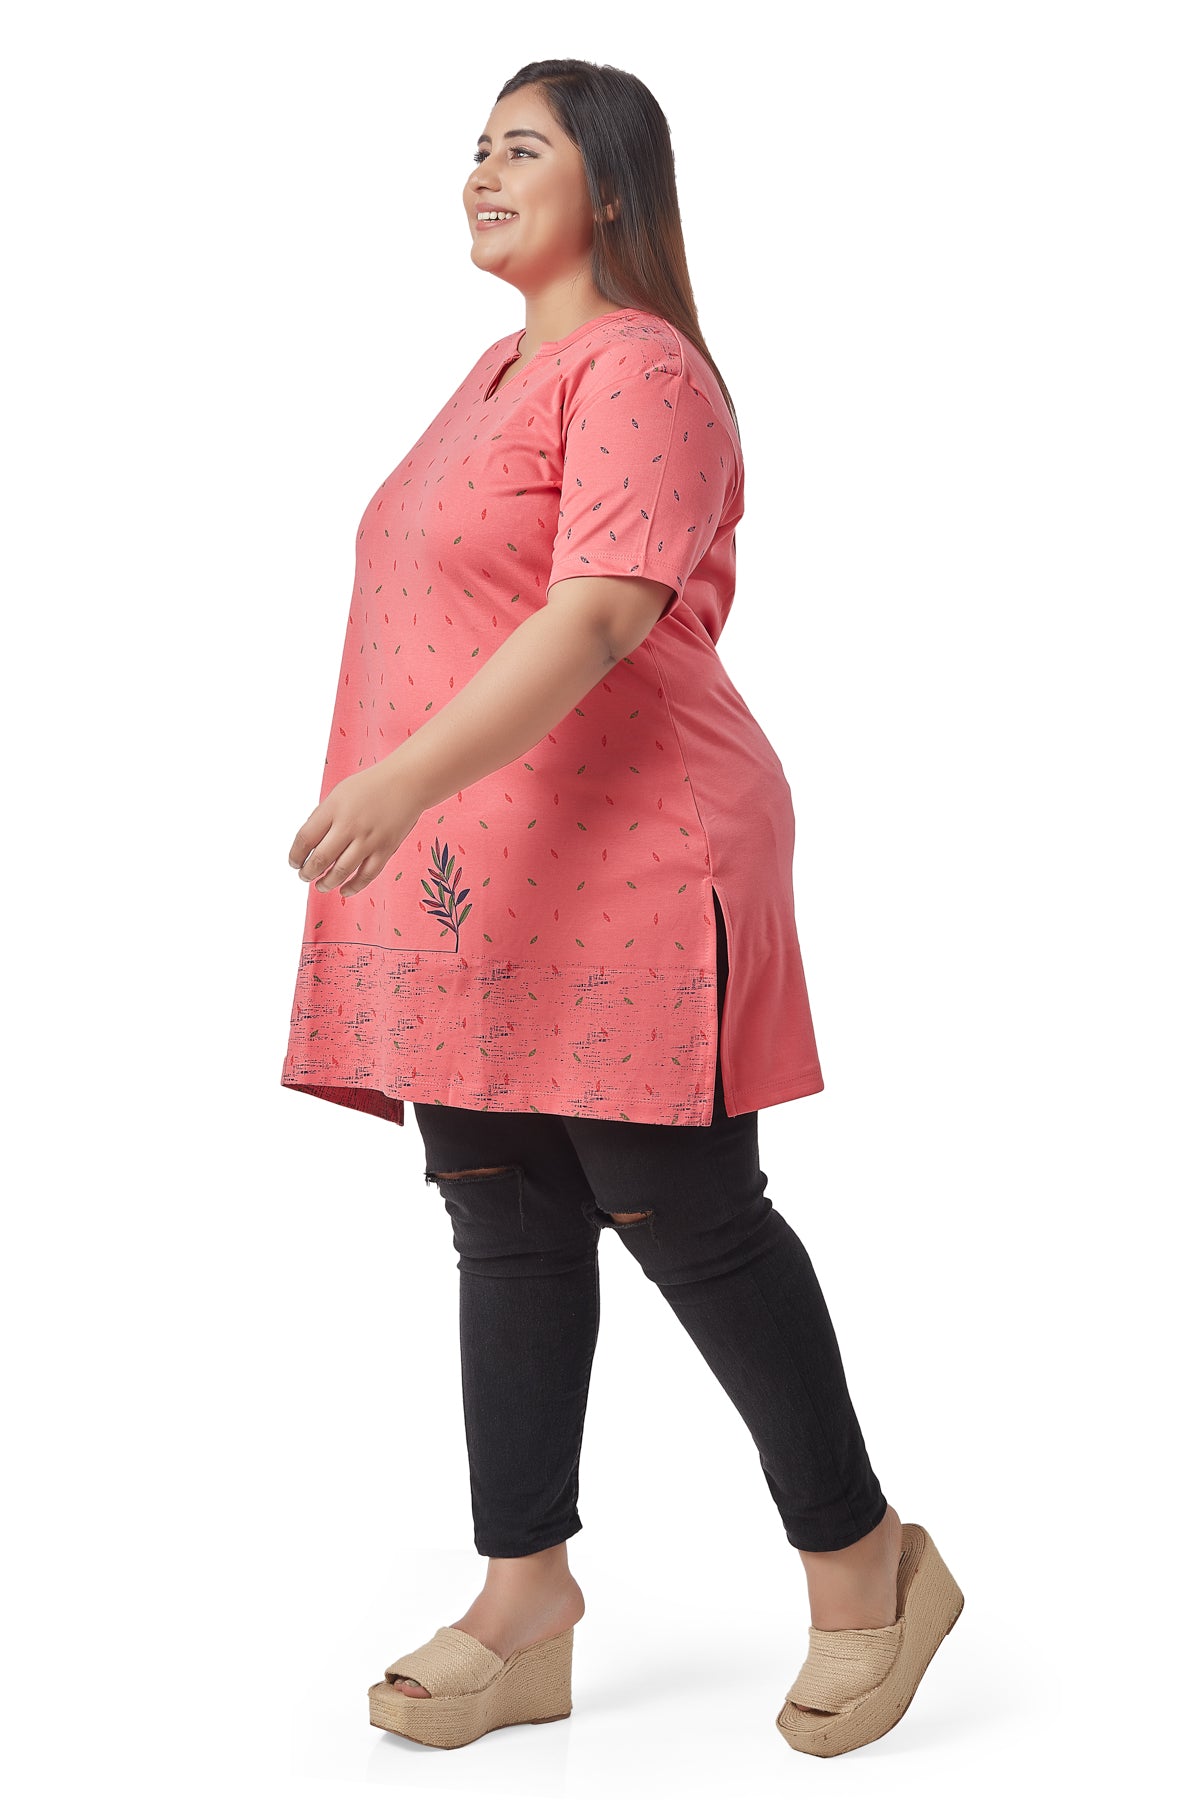 Comfy Pink Cotton Plus Size Printed Half Sleeve Long Tops For Women Online In India